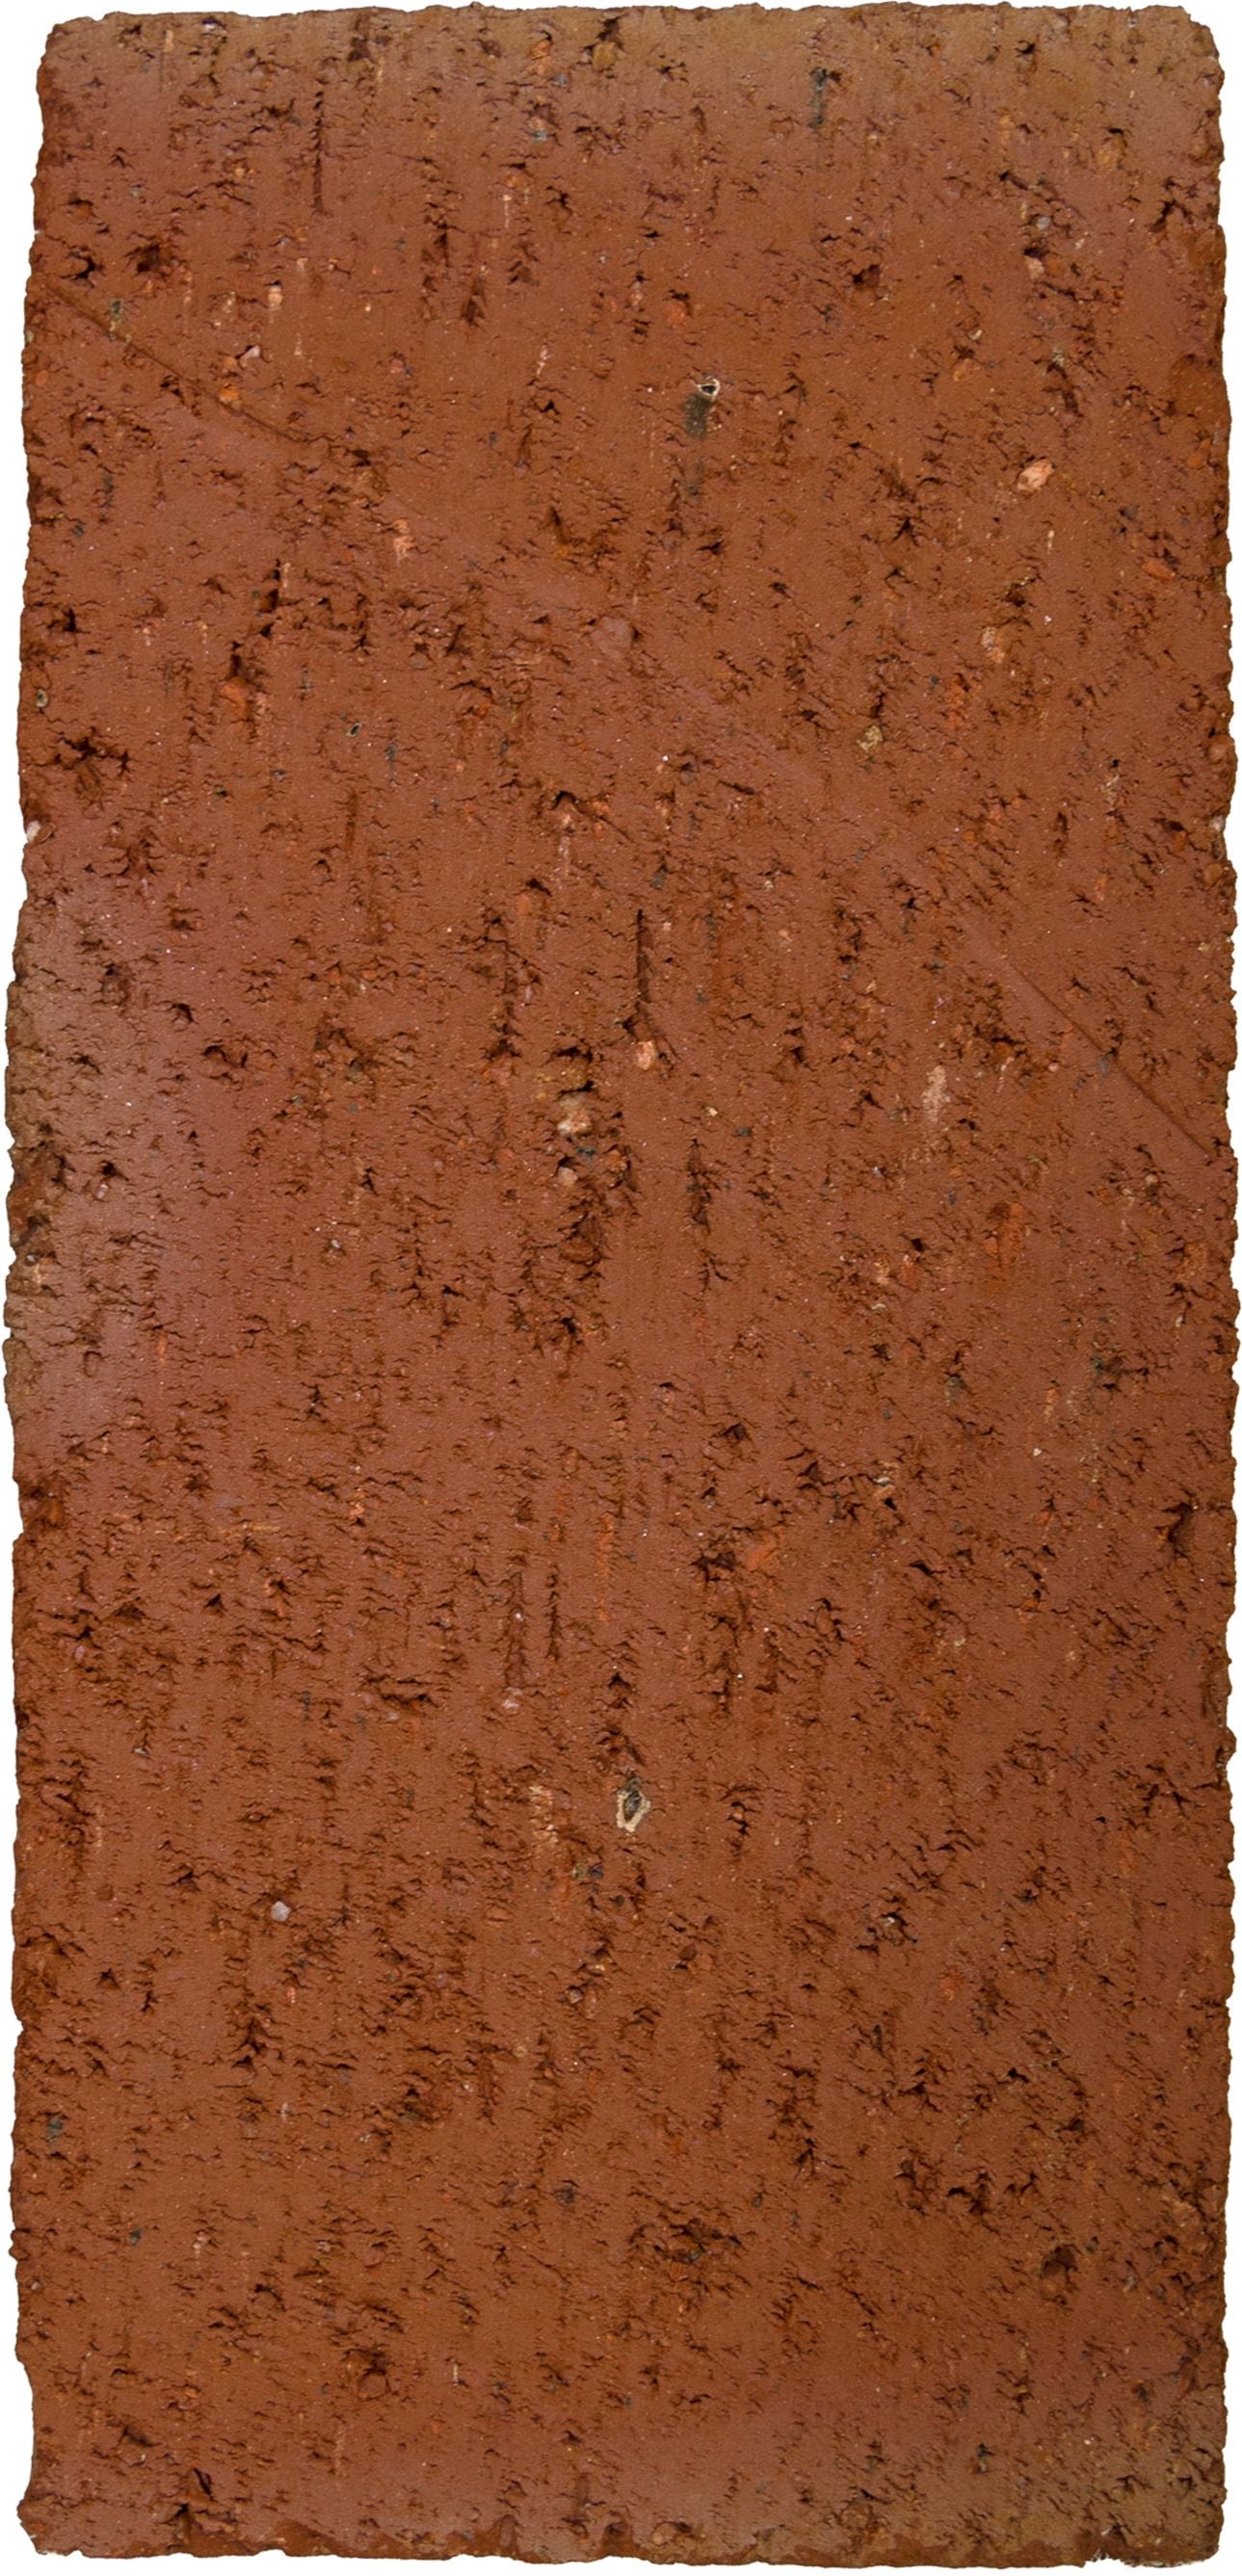 Red Soil Common Burnt Clay Brick, Size: 225 mm X 112.5 mm X 75 mm at Rs 4  in Bhilwara